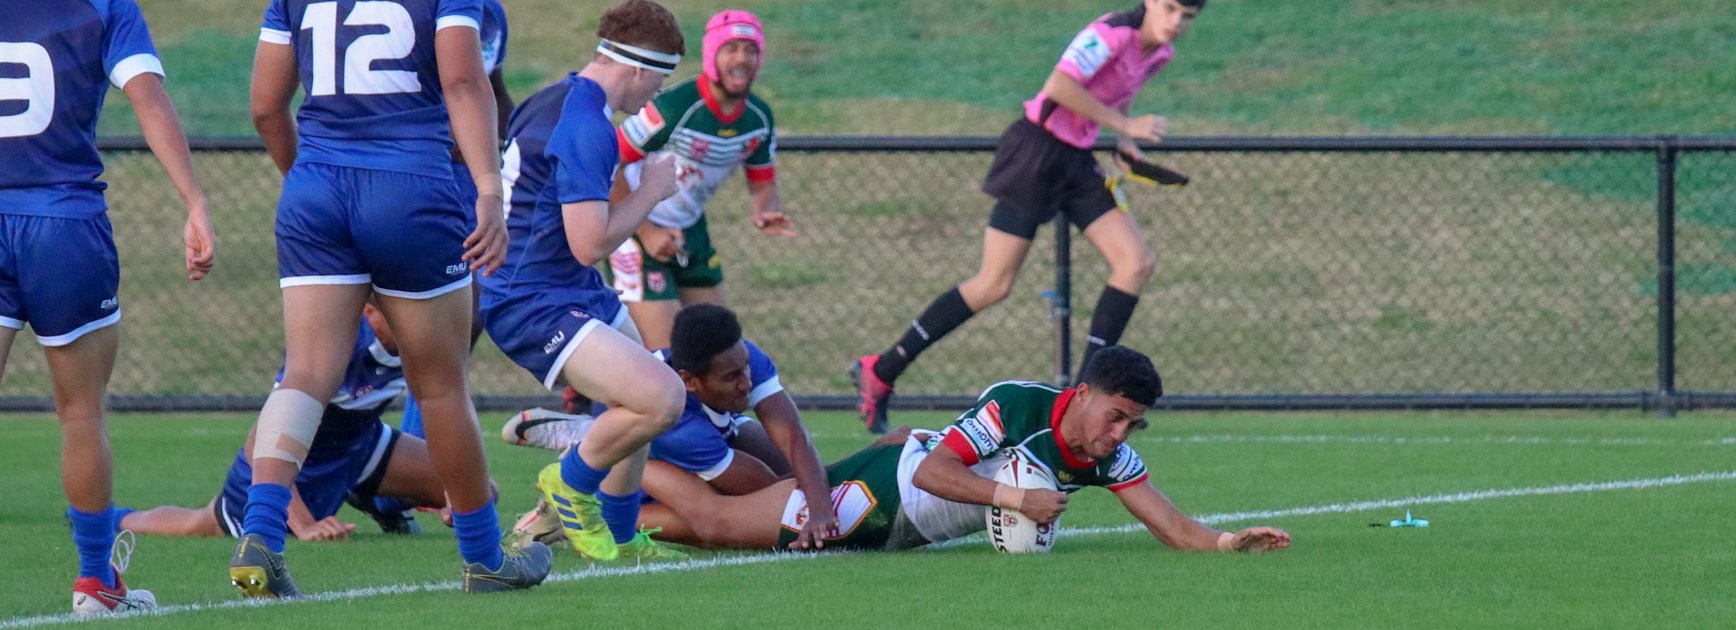 City v Country teams announced for Under 16 clash